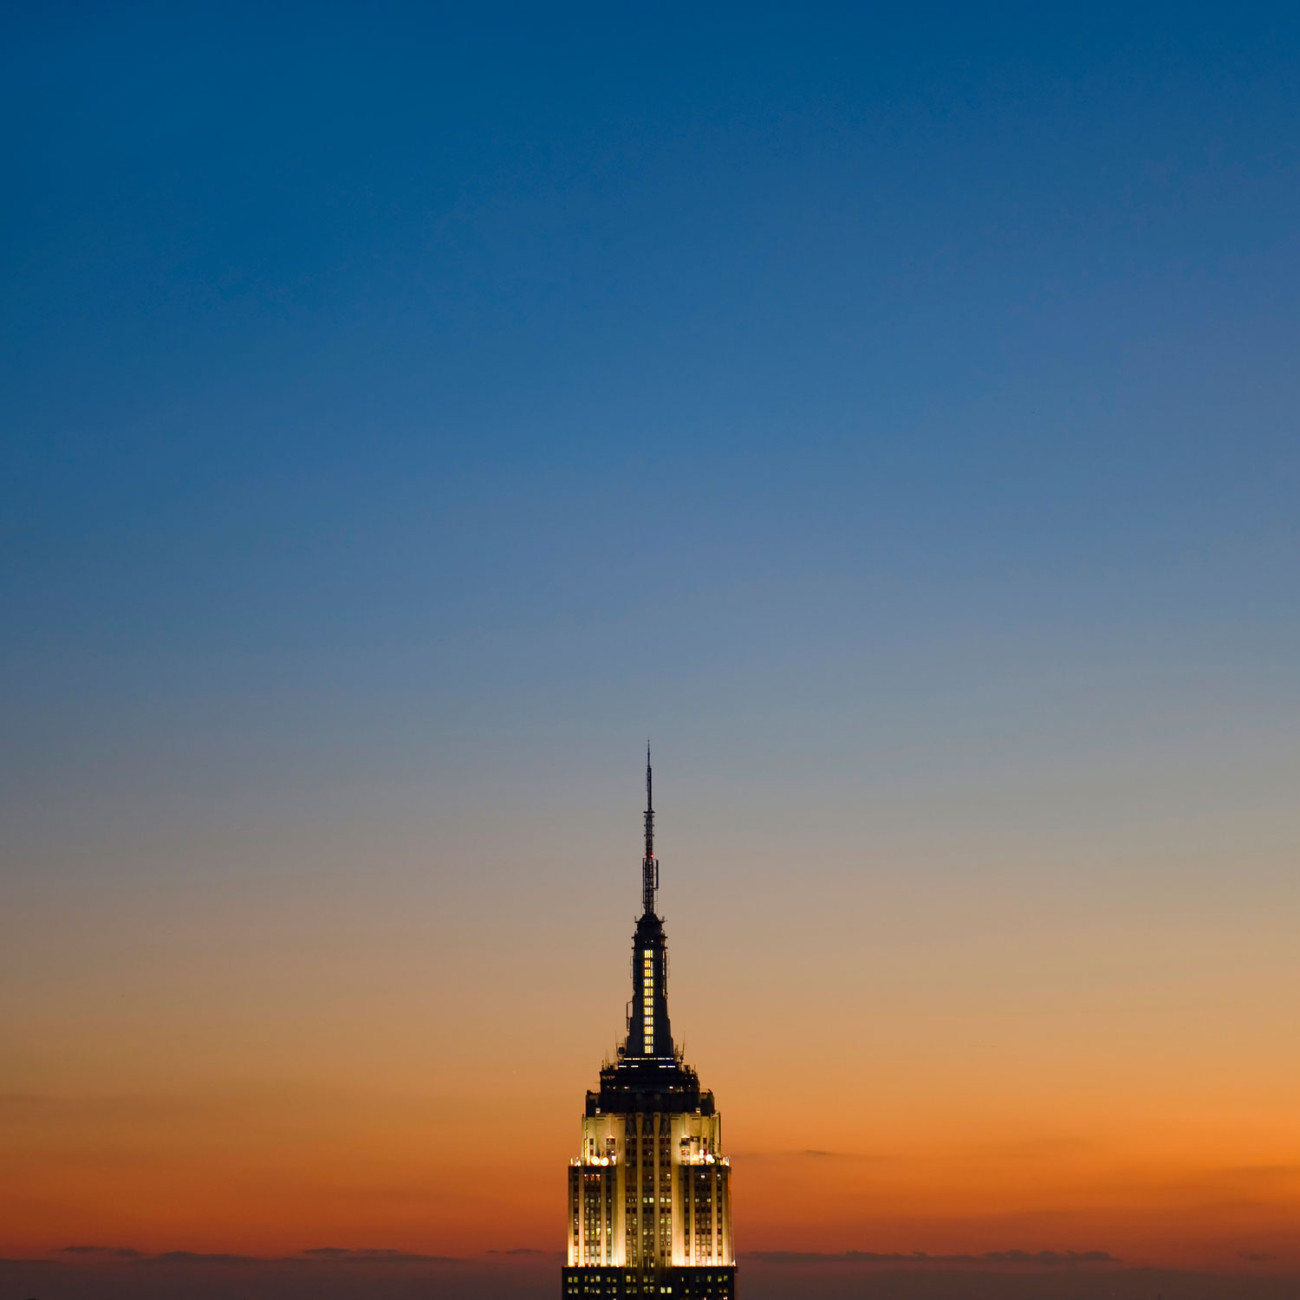 Top of the Empire State Building at evening